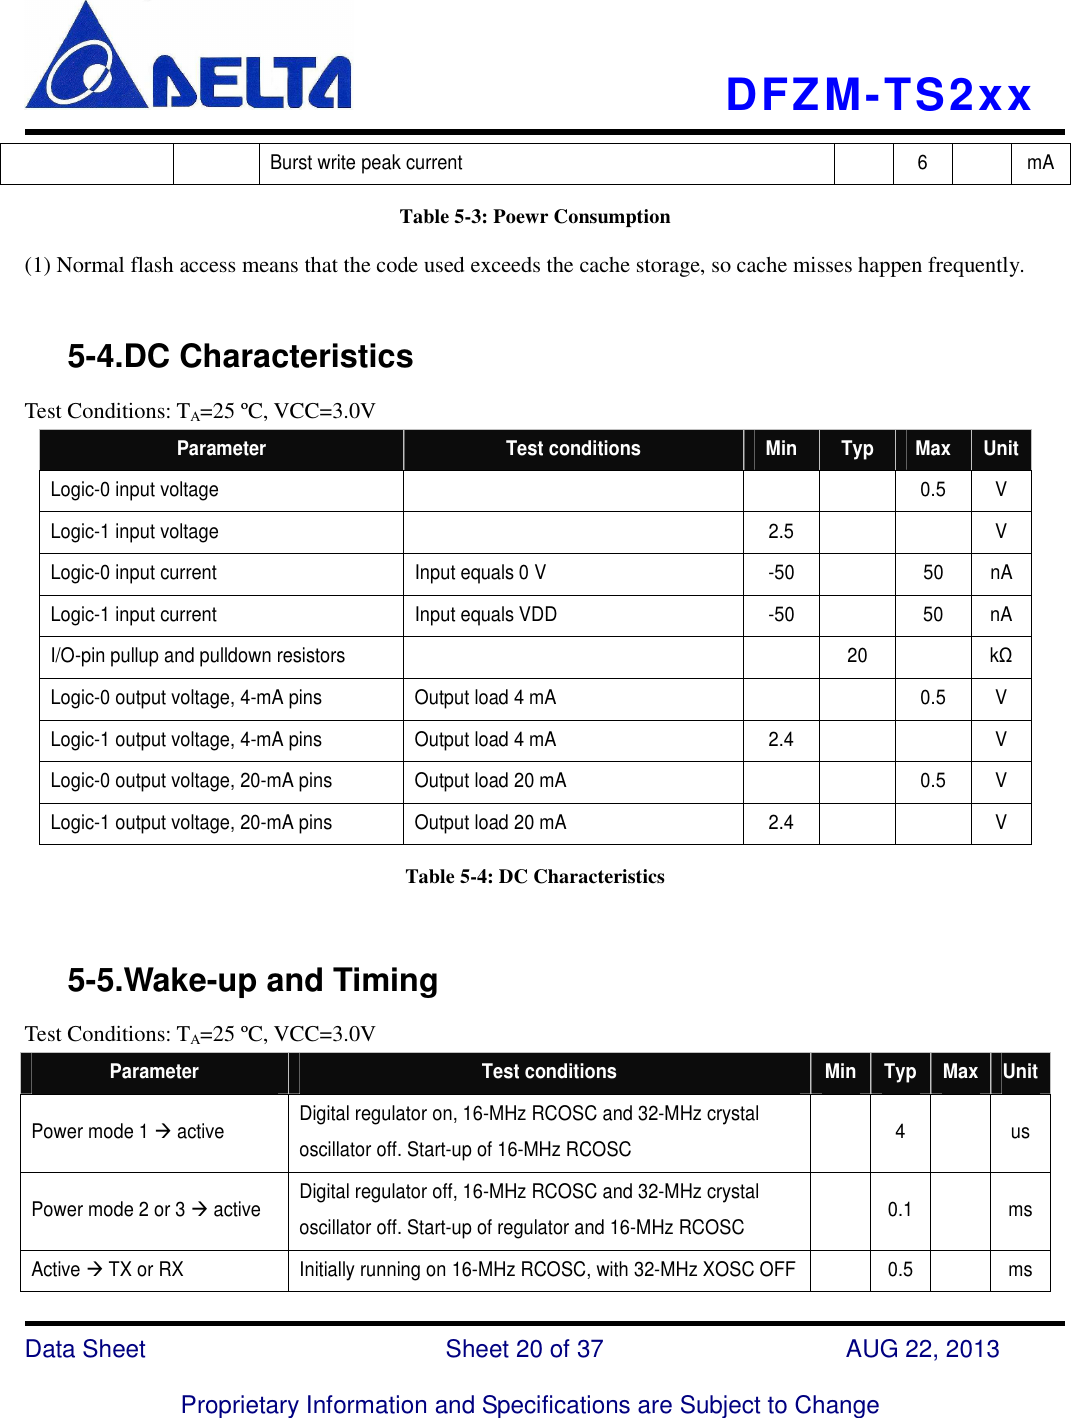    DFZM-TS2xx   Data Sheet                              Sheet 20 of 37                    AUG 22, 2013  Proprietary Information and Specifications are Subject to Change Burst write peak current    6    mA Table 5-3: Poewr Consumption (1) Normal flash access means that the code used exceeds the cache storage, so cache misses happen frequently.       5-4.DC Characteristics Test Conditions: TA=25 ºC, VCC=3.0V Parameter  Test conditions  Min  Typ  Max  Unit Logic-0 input voltage        0.5  V Logic-1 input voltage    2.5      V Logic-0 input current  Input equals 0 V  -50    50  nA Logic-1 input current  Input equals VDD  -50    50  nA I/O-pin pullup and pulldown resistors      20    kΩ Logic-0 output voltage, 4-mA pins  Output load 4 mA      0.5  V Logic-1 output voltage, 4-mA pins  Output load 4 mA  2.4      V Logic-0 output voltage, 20-mA pins  Output load 20 mA      0.5  V Logic-1 output voltage, 20-mA pins  Output load 20 mA  2.4      V Table 5-4: DC Characteristics       5-5.Wake-up and Timing Test Conditions: TA=25 ºC, VCC=3.0V Parameter  Test conditions  Min Typ Max Unit Power mode 1  active  Digital regulator on, 16-MHz RCOSC and 32-MHz crystal oscillator off. Start-up of 16-MHz RCOSC    4    us Power mode 2 or 3  active  Digital regulator off, 16-MHz RCOSC and 32-MHz crystal oscillator off. Start-up of regulator and 16-MHz RCOSC    0.1   ms Active  TX or RX  Initially running on 16-MHz RCOSC, with 32-MHz XOSC OFF   0.5   ms 